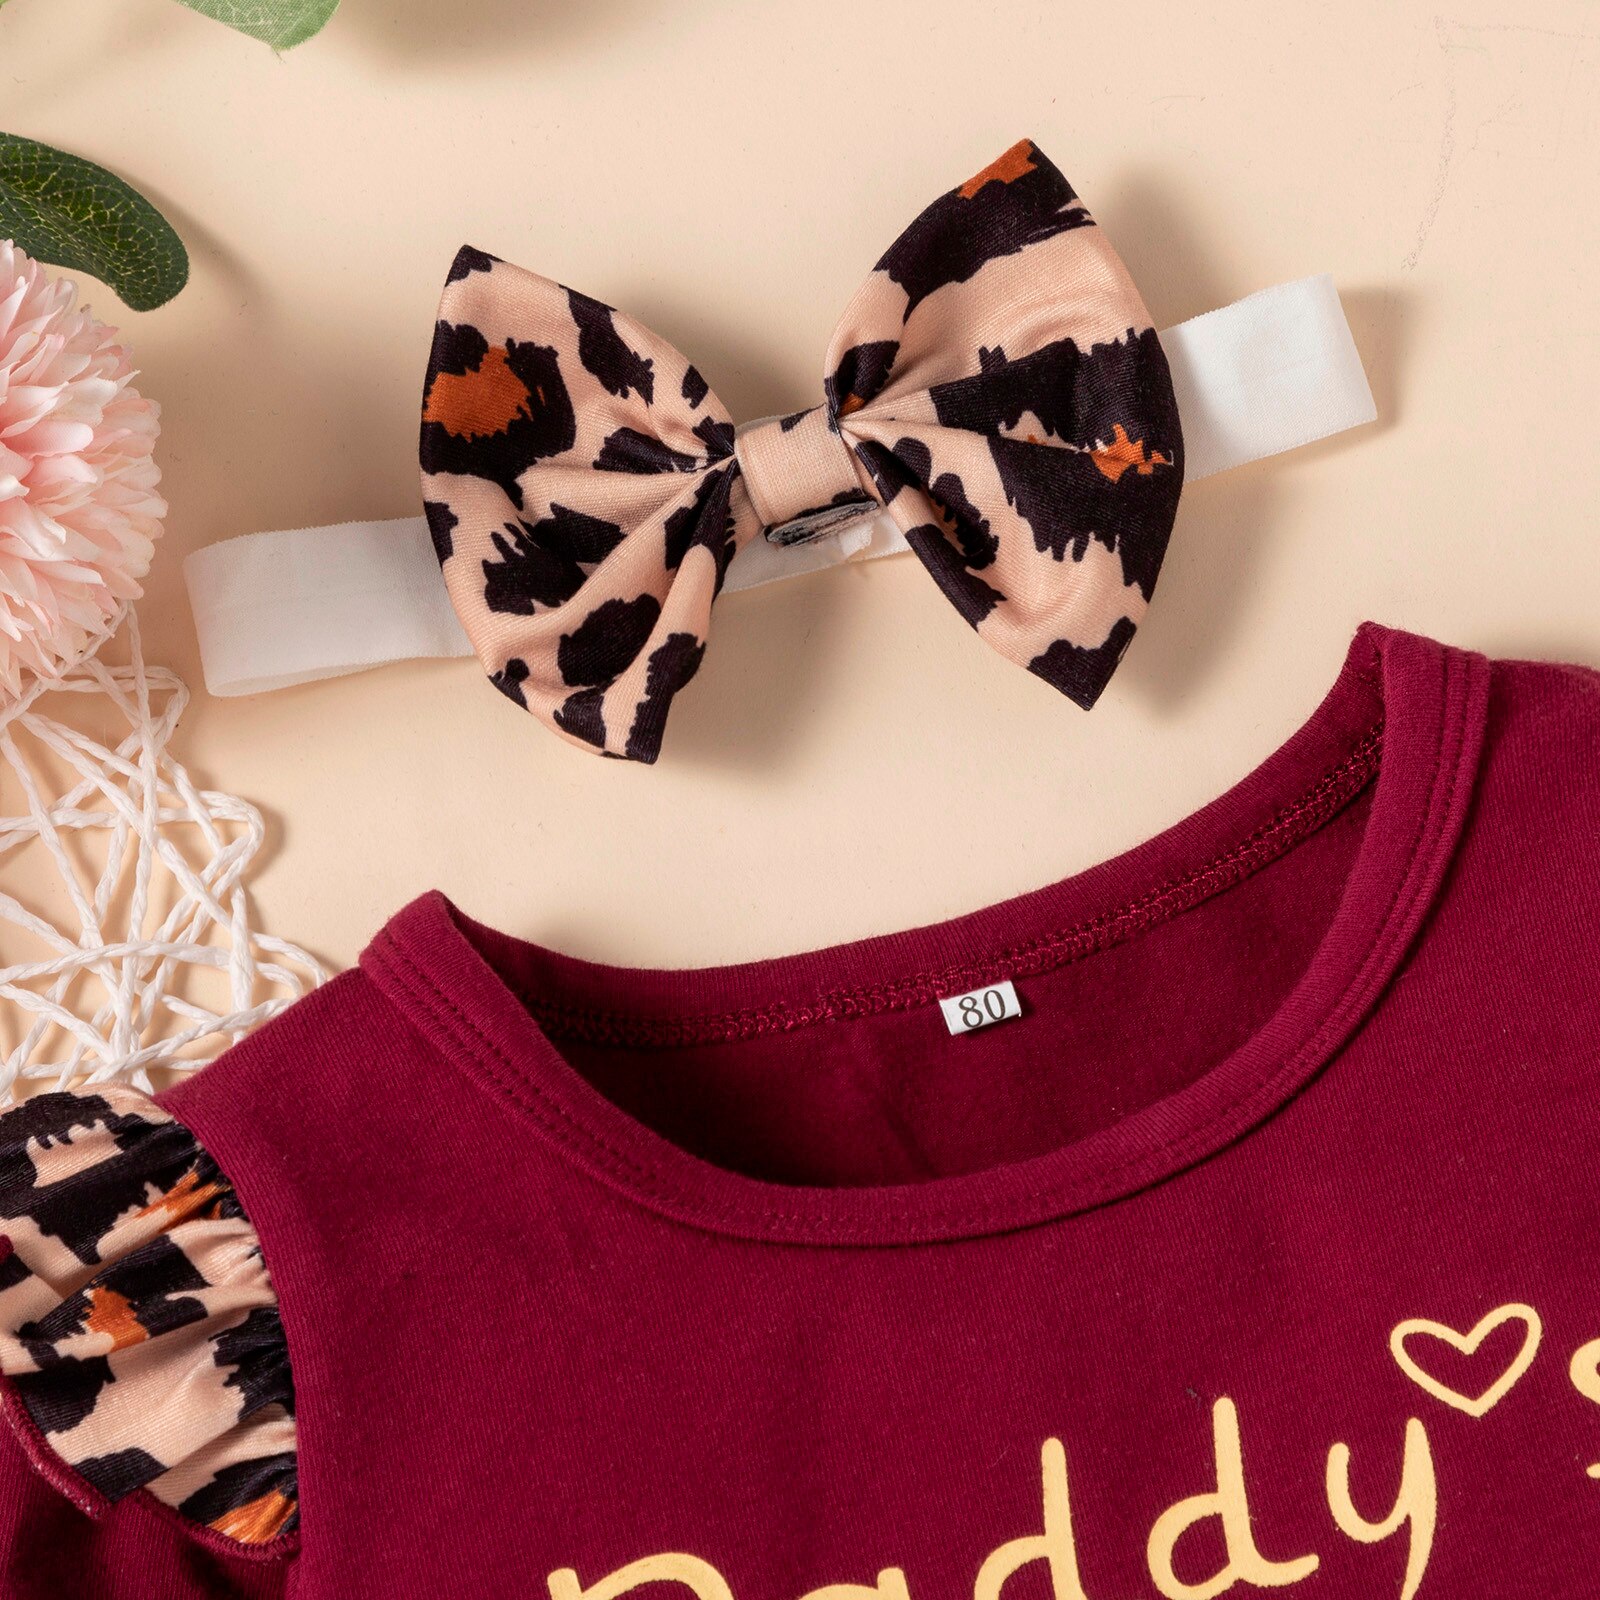 New-Toddler-Infant-Baby-Girls-Clothes-Letter-Leopard-Print-Top-Bow-Pants-Set-Baby-Outfits-Fall-4